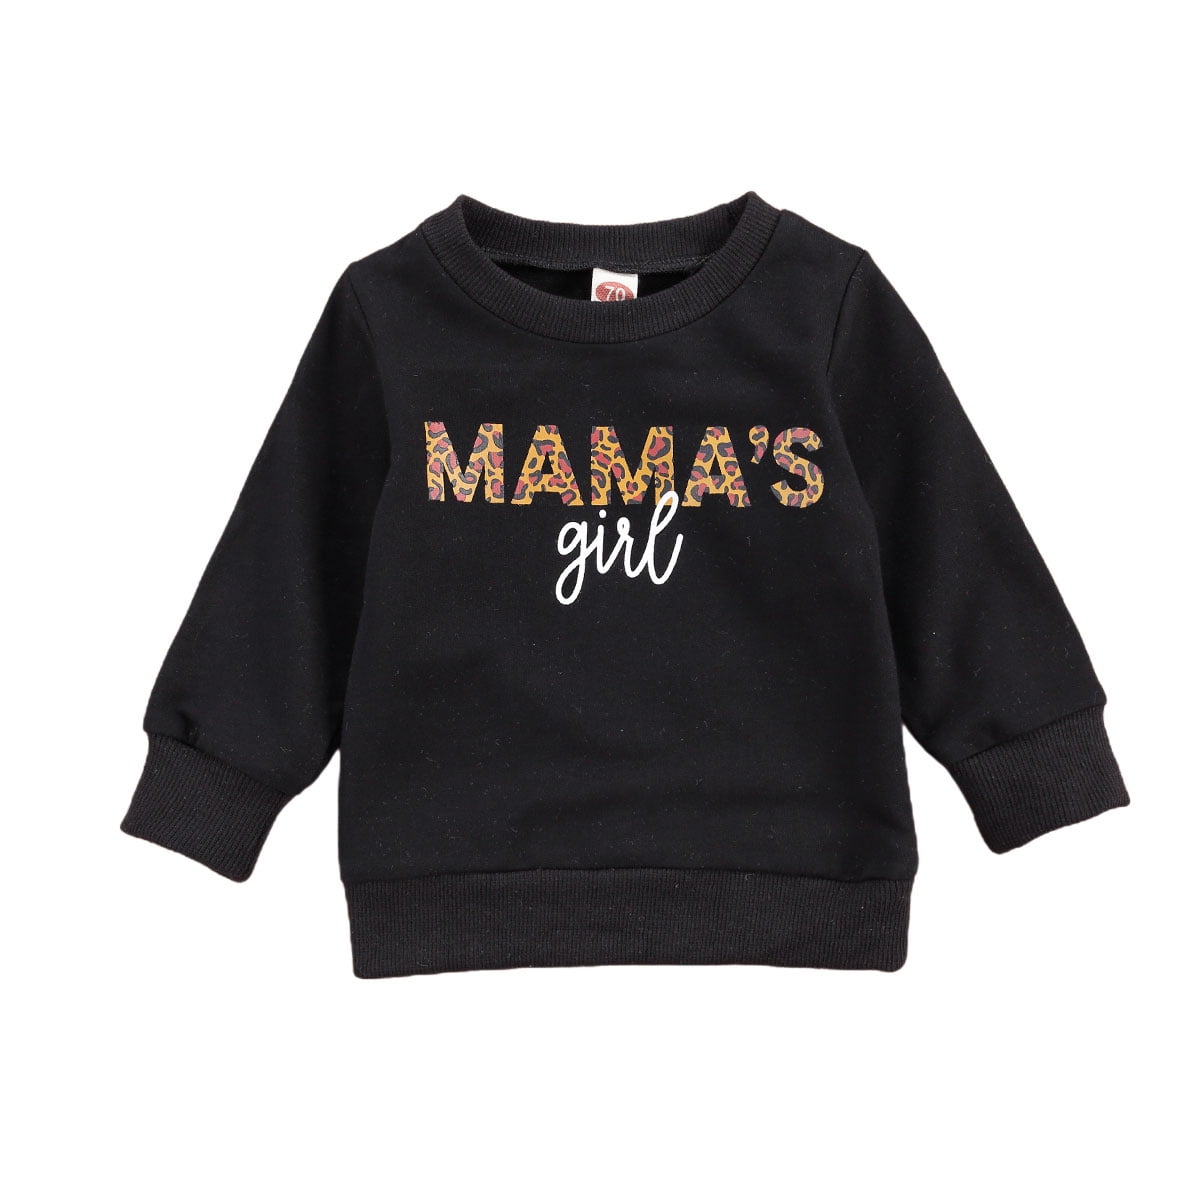 Sunsiom Kids Girls Clothes Set Spring Fall Ong Sleeve Crew Neck Letters  Print Sweatshirt With Elastic Waist Sweatpants 2 Color Black Kid Size 4T